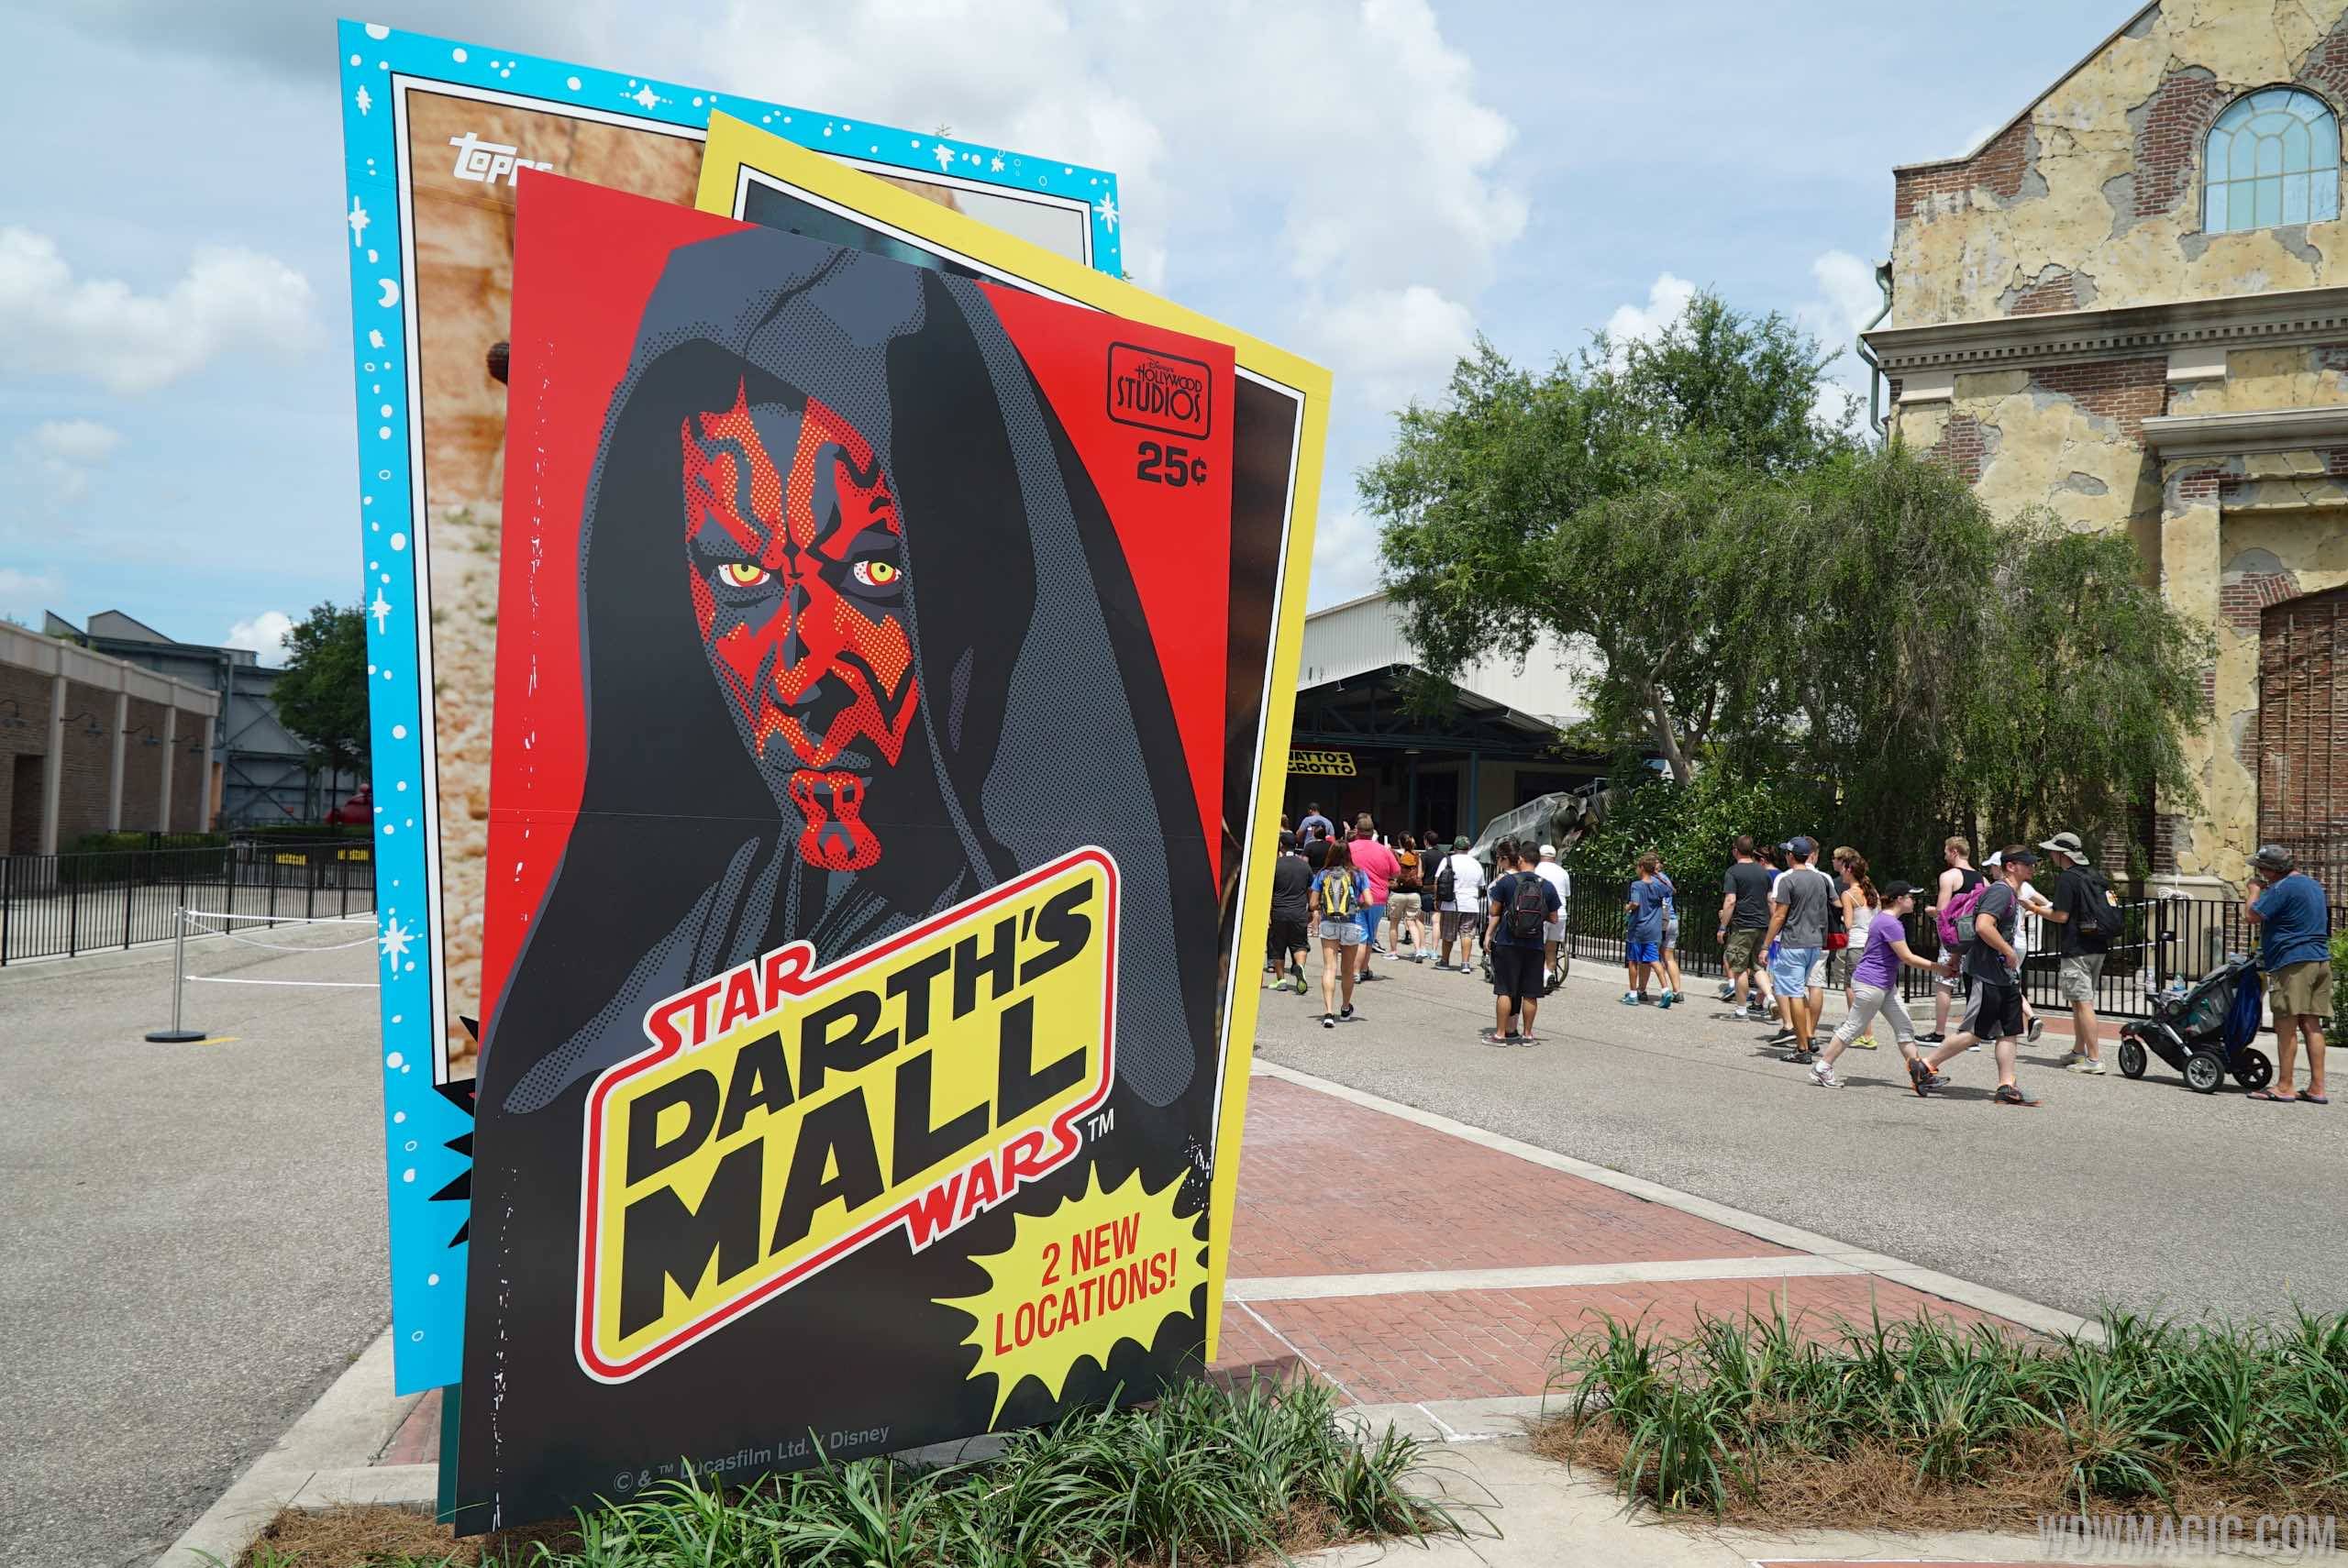 PHOTOS - Star Wars fans line up for hours to buy merchandise at Darth's Mall during Star Wars Weekends